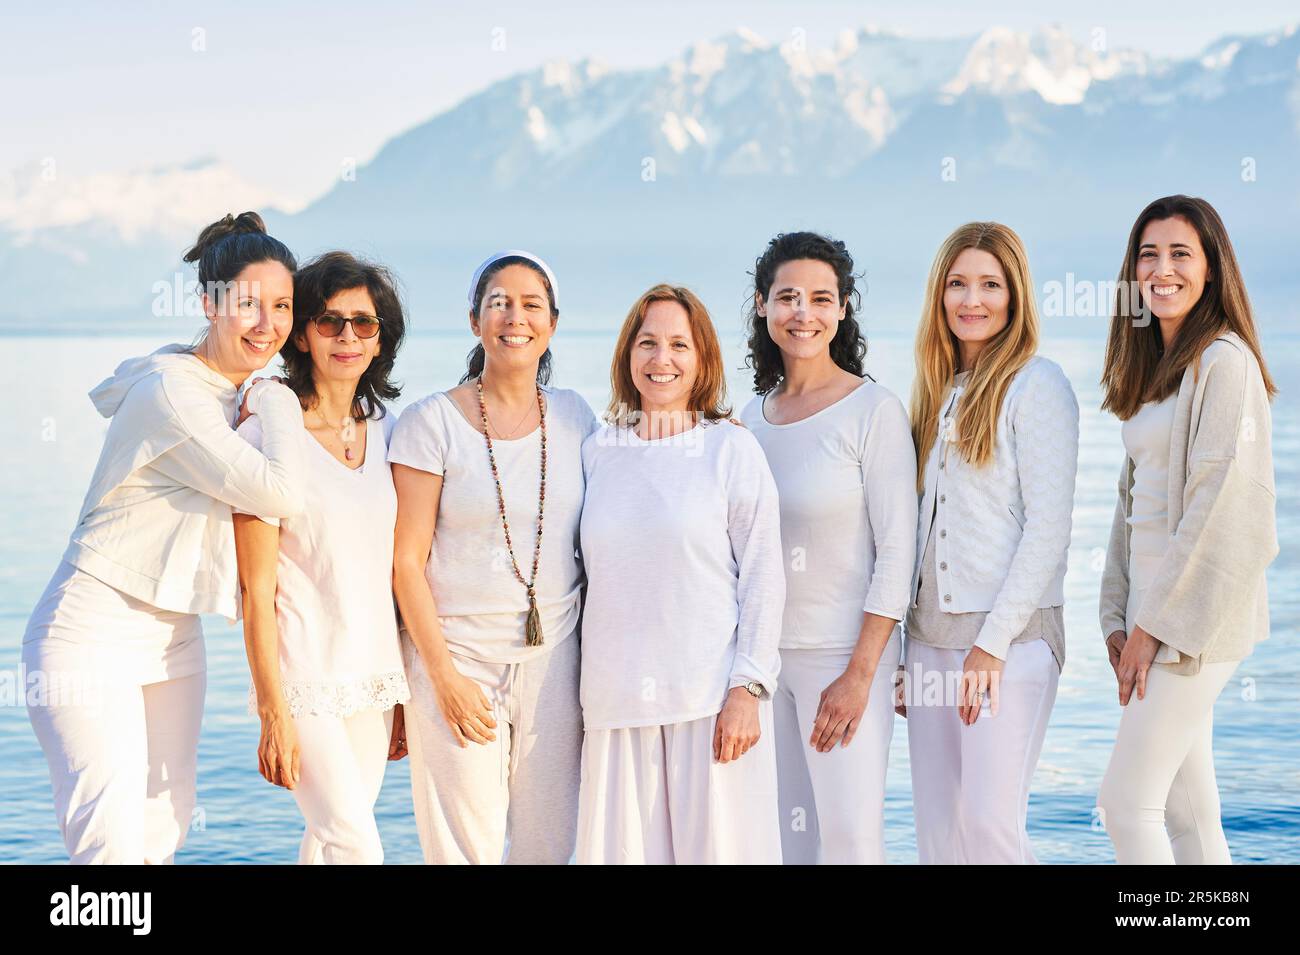 Group portrait of beautiful women posing outside with beautiful mountain landscape on background, wearing white clothes Stock Photo